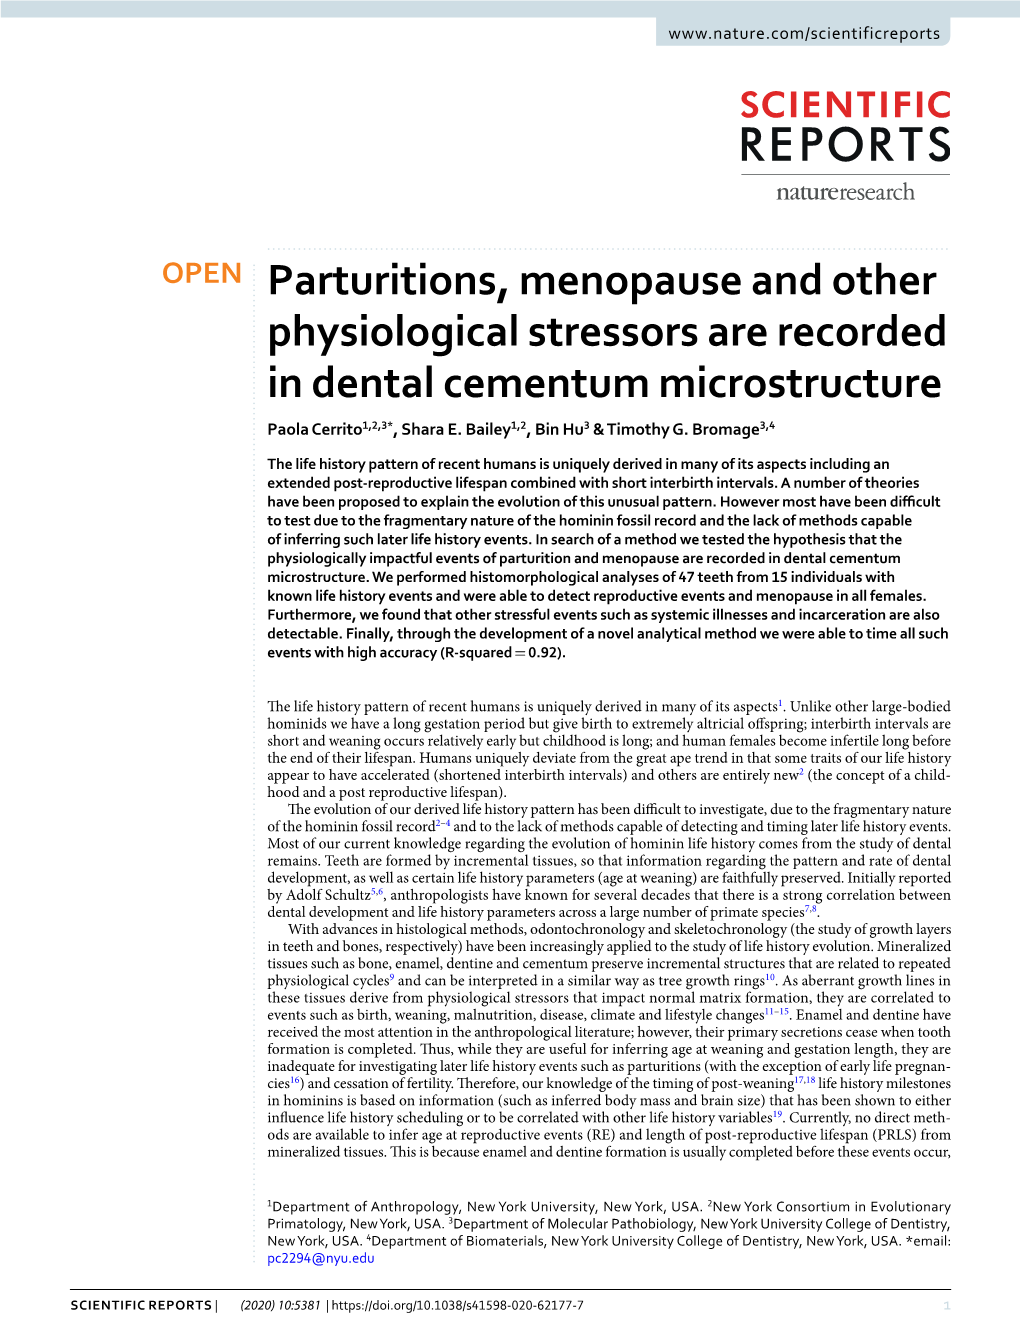 Parturitions, Menopause and Other Physiological Stressors Are Recorded in Dental Cementum Microstructure Paola Cerrito1,2,3*, Shara E